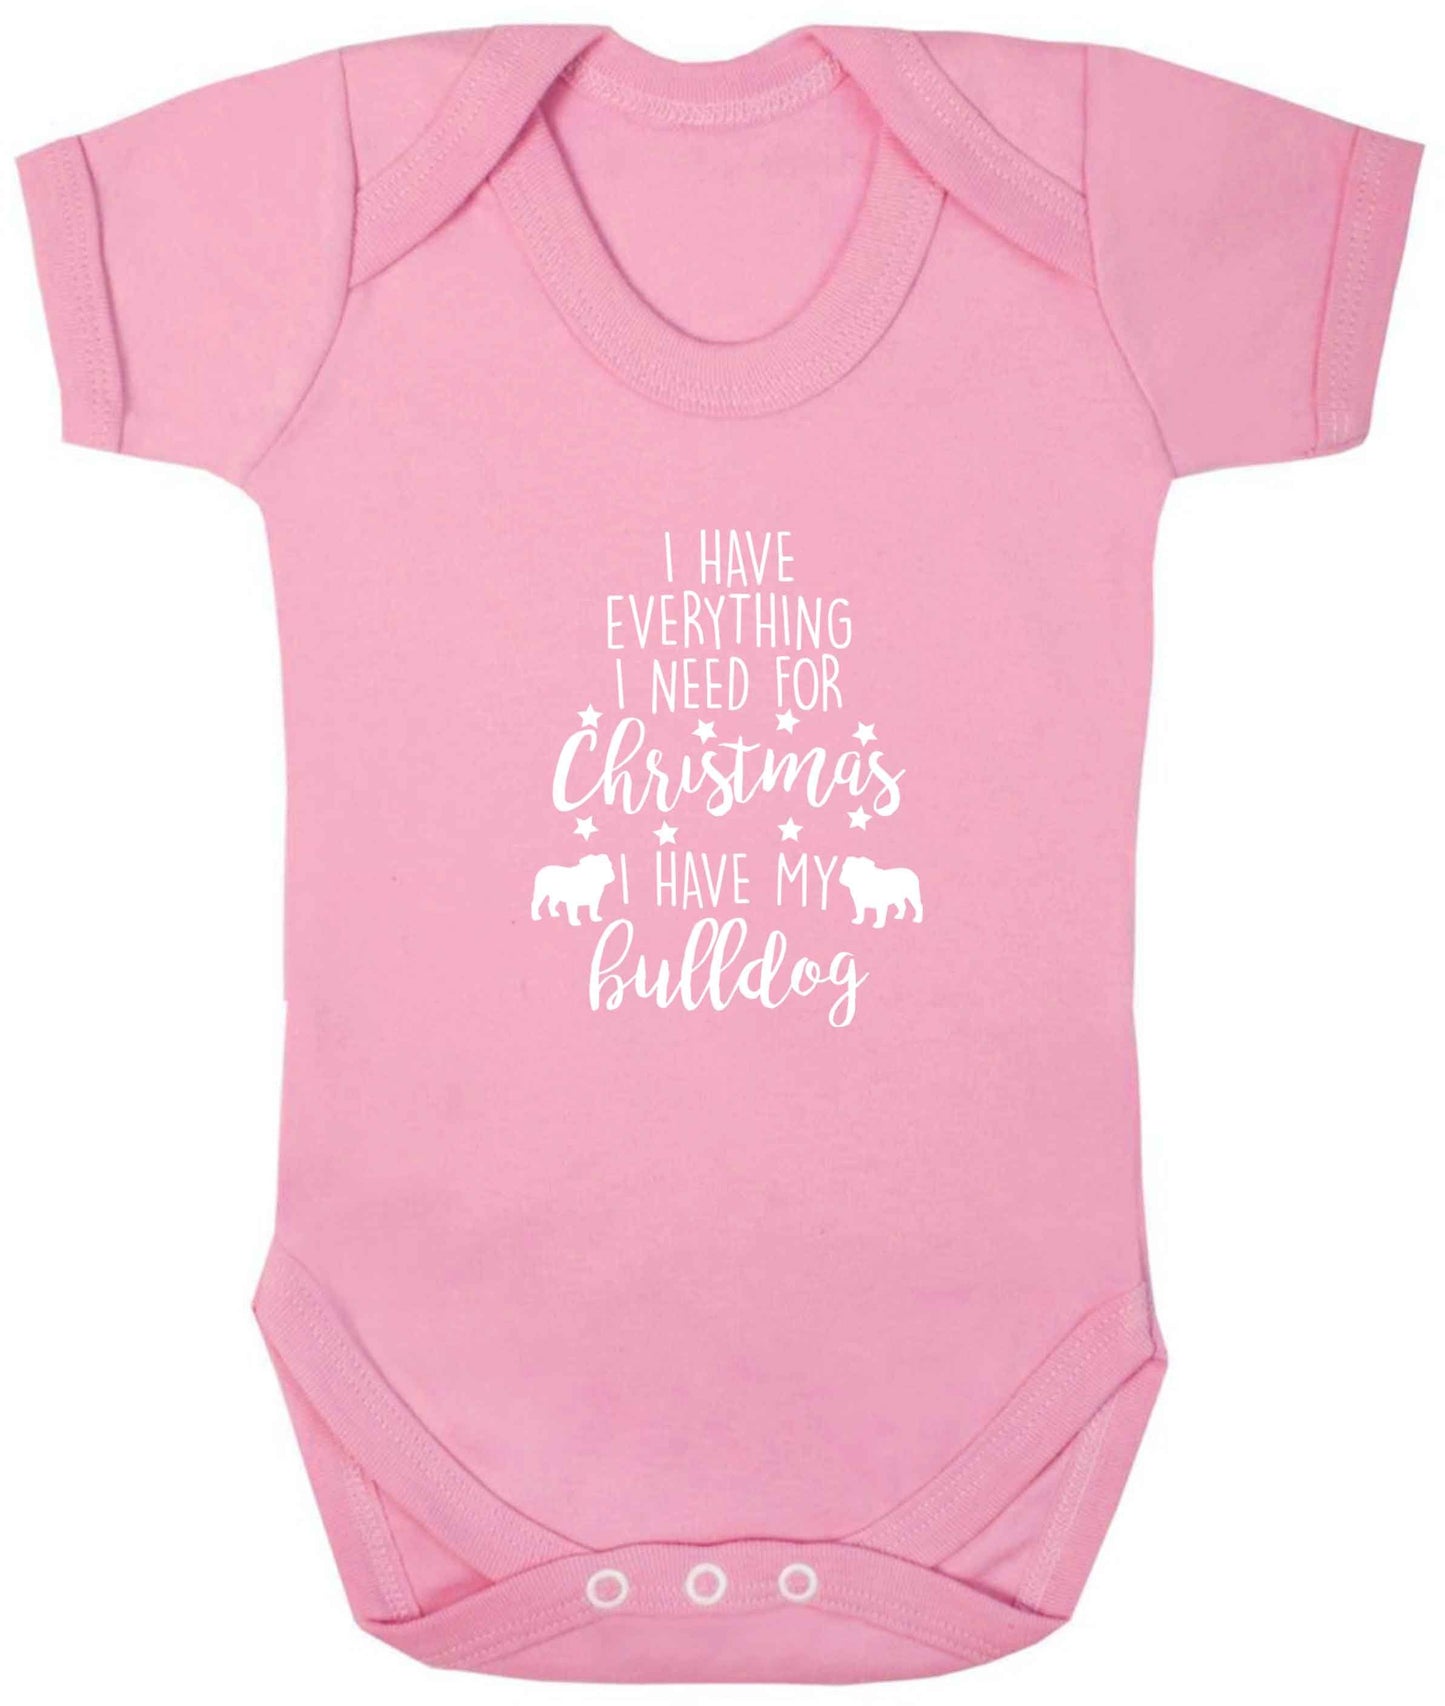 I have everything I need for Christmas I have my bulldog baby vest pale pink 18-24 months